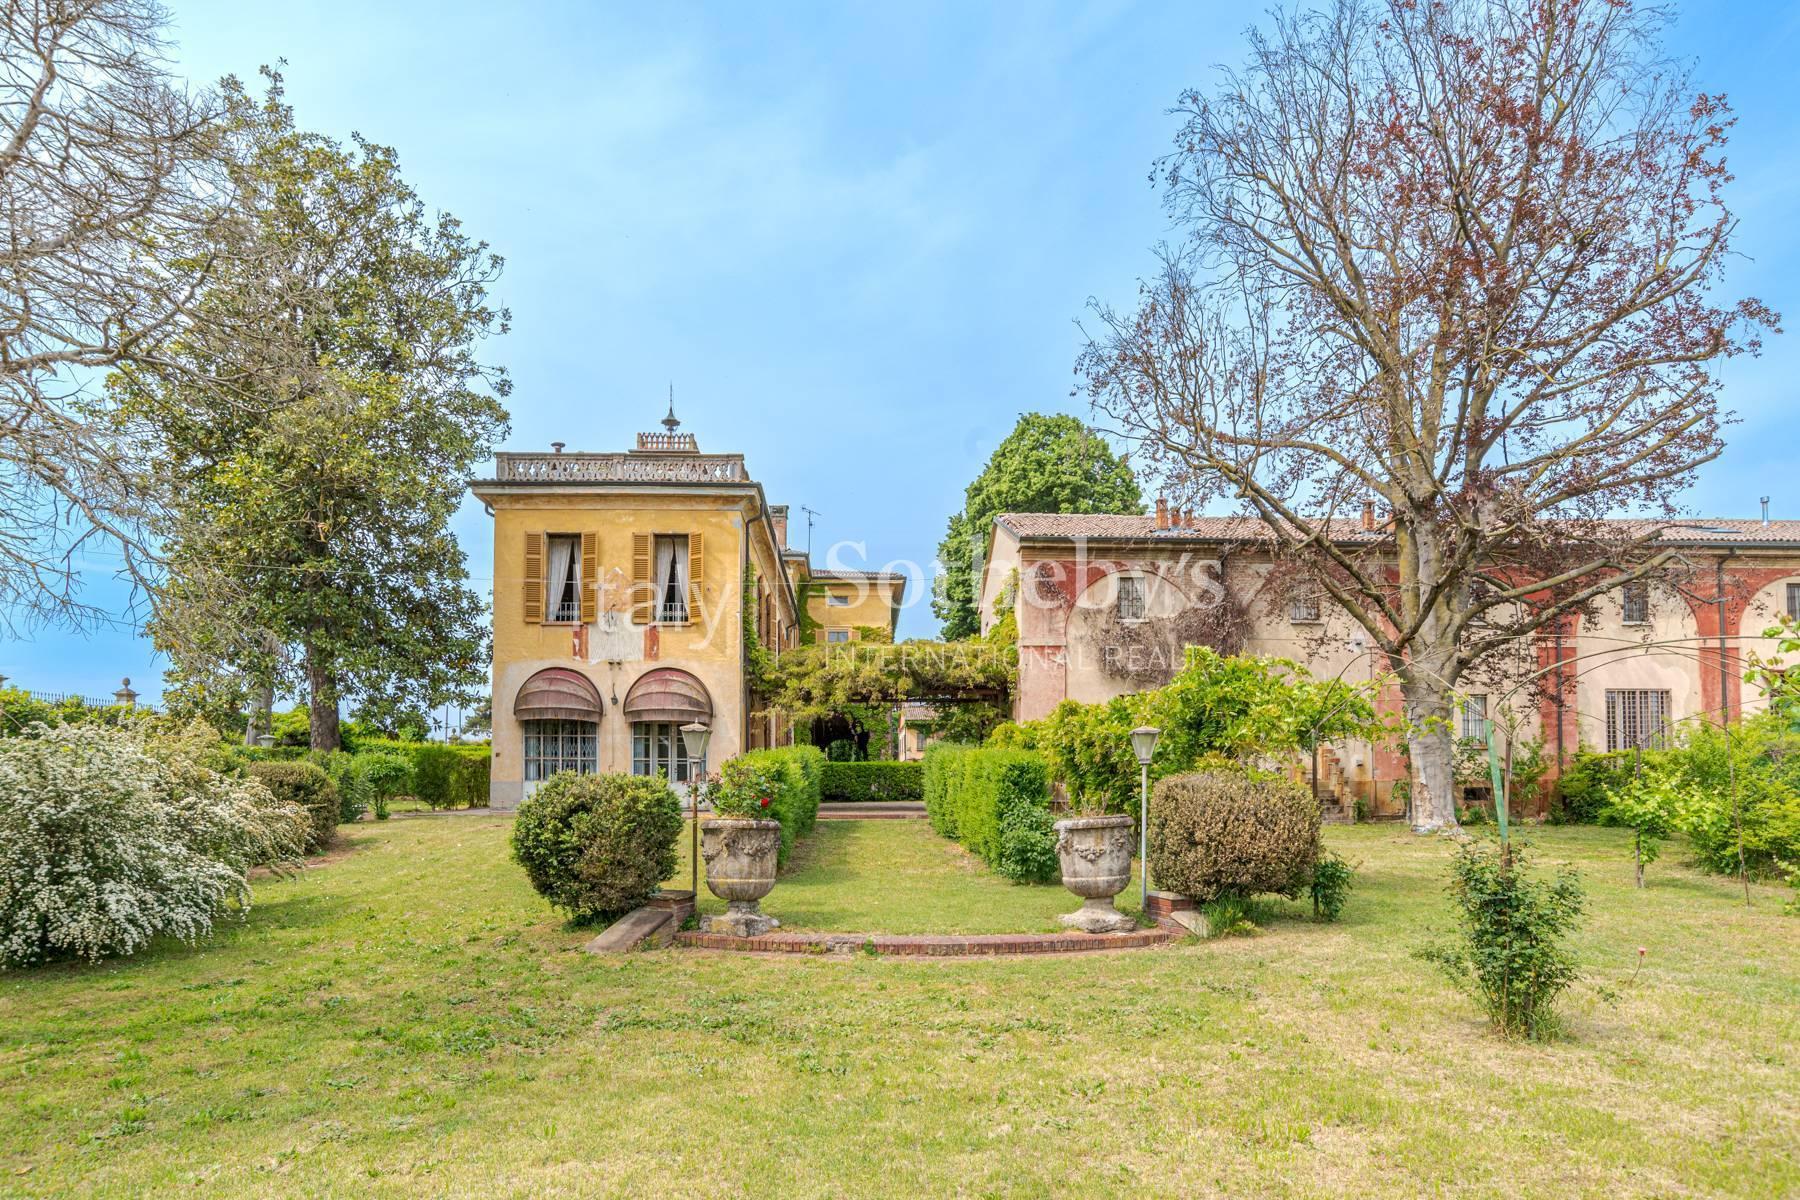 18th century villa with park in Oltrepo' Pavese - 11